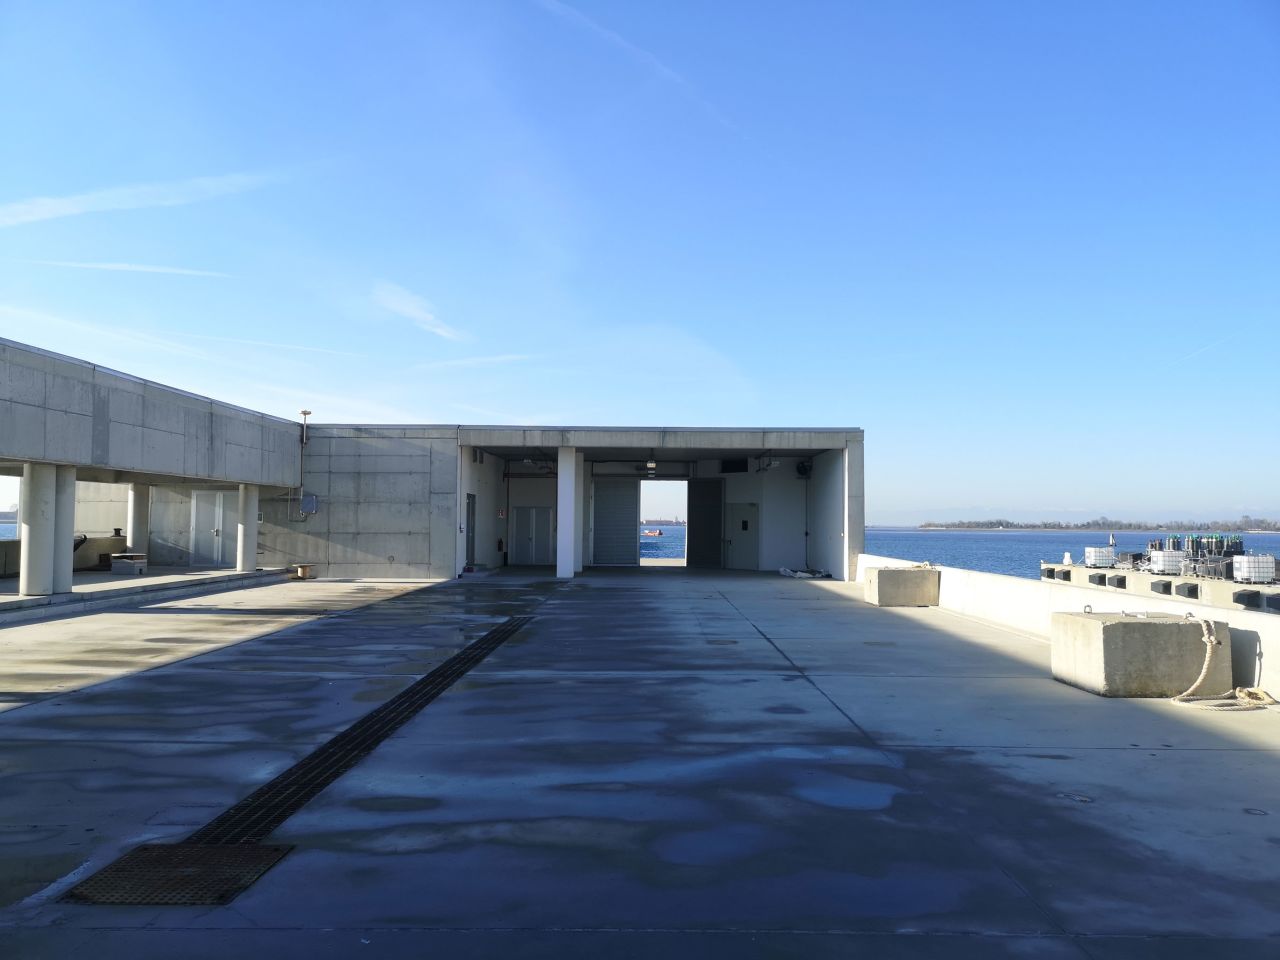 <strong>Bond lair: </strong>The artificial island with its concrete structures resembles something from a movie.